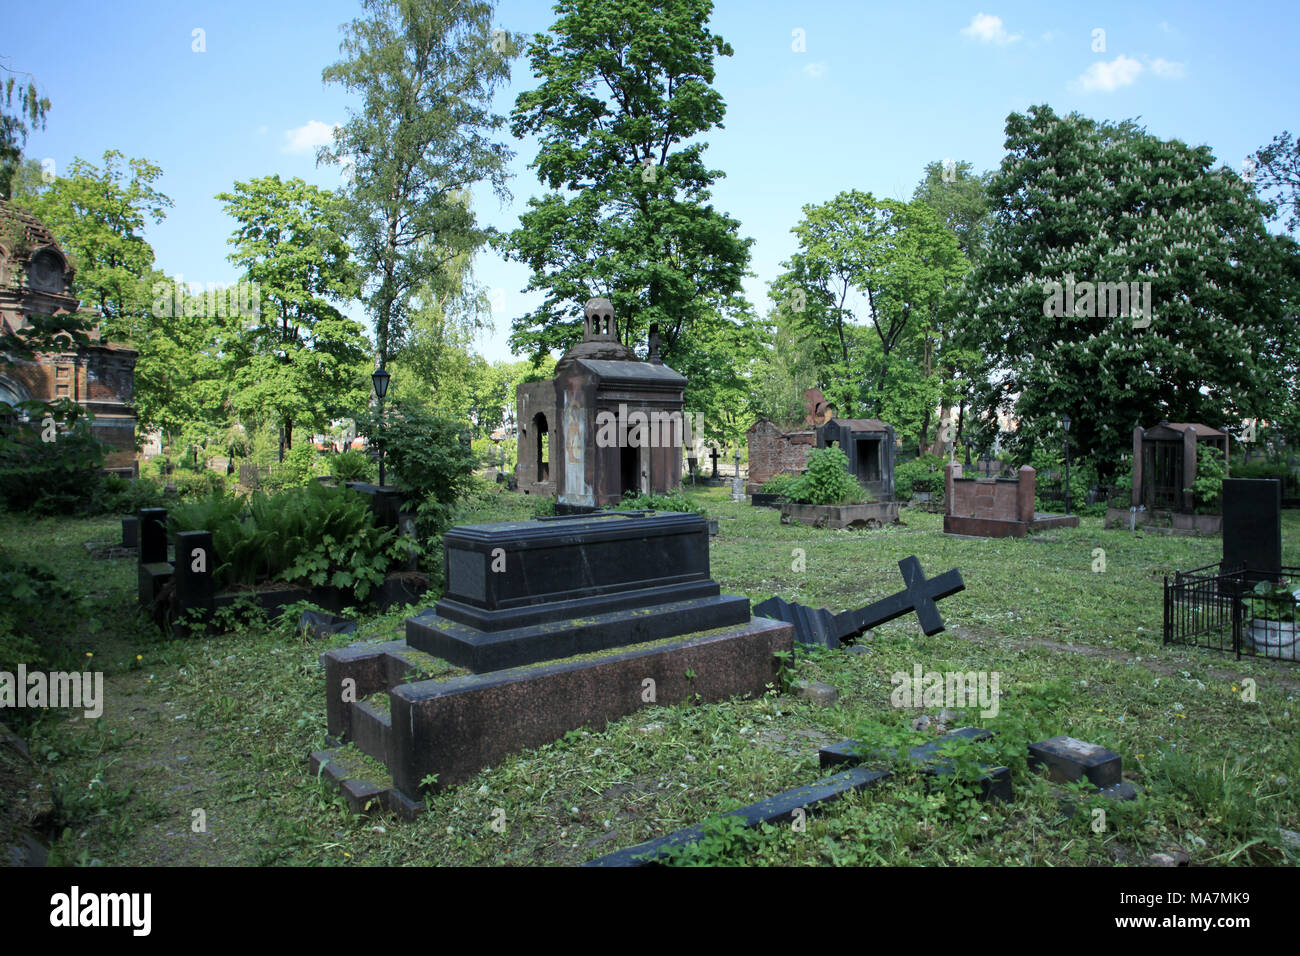 Old ruined cemetery dramatic scenery Stock Photo